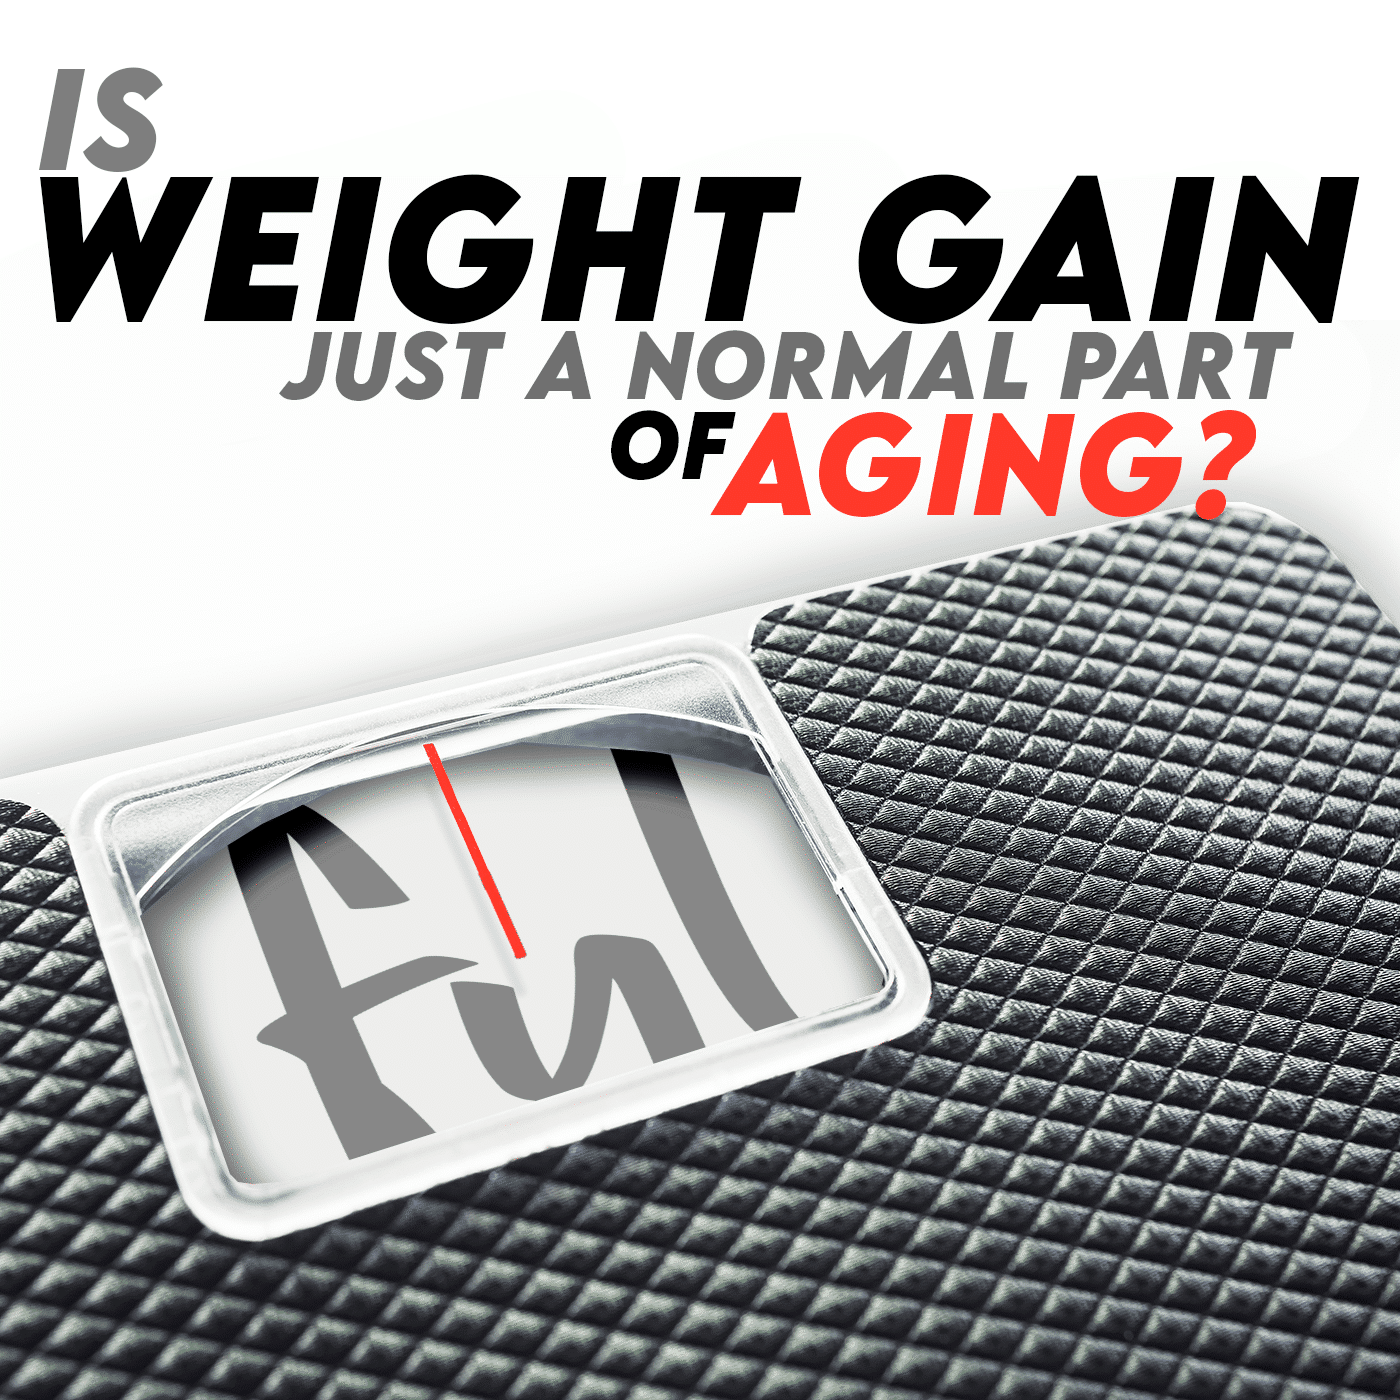 Is Weight Gain REALLY Just a Normal Part of Aging?